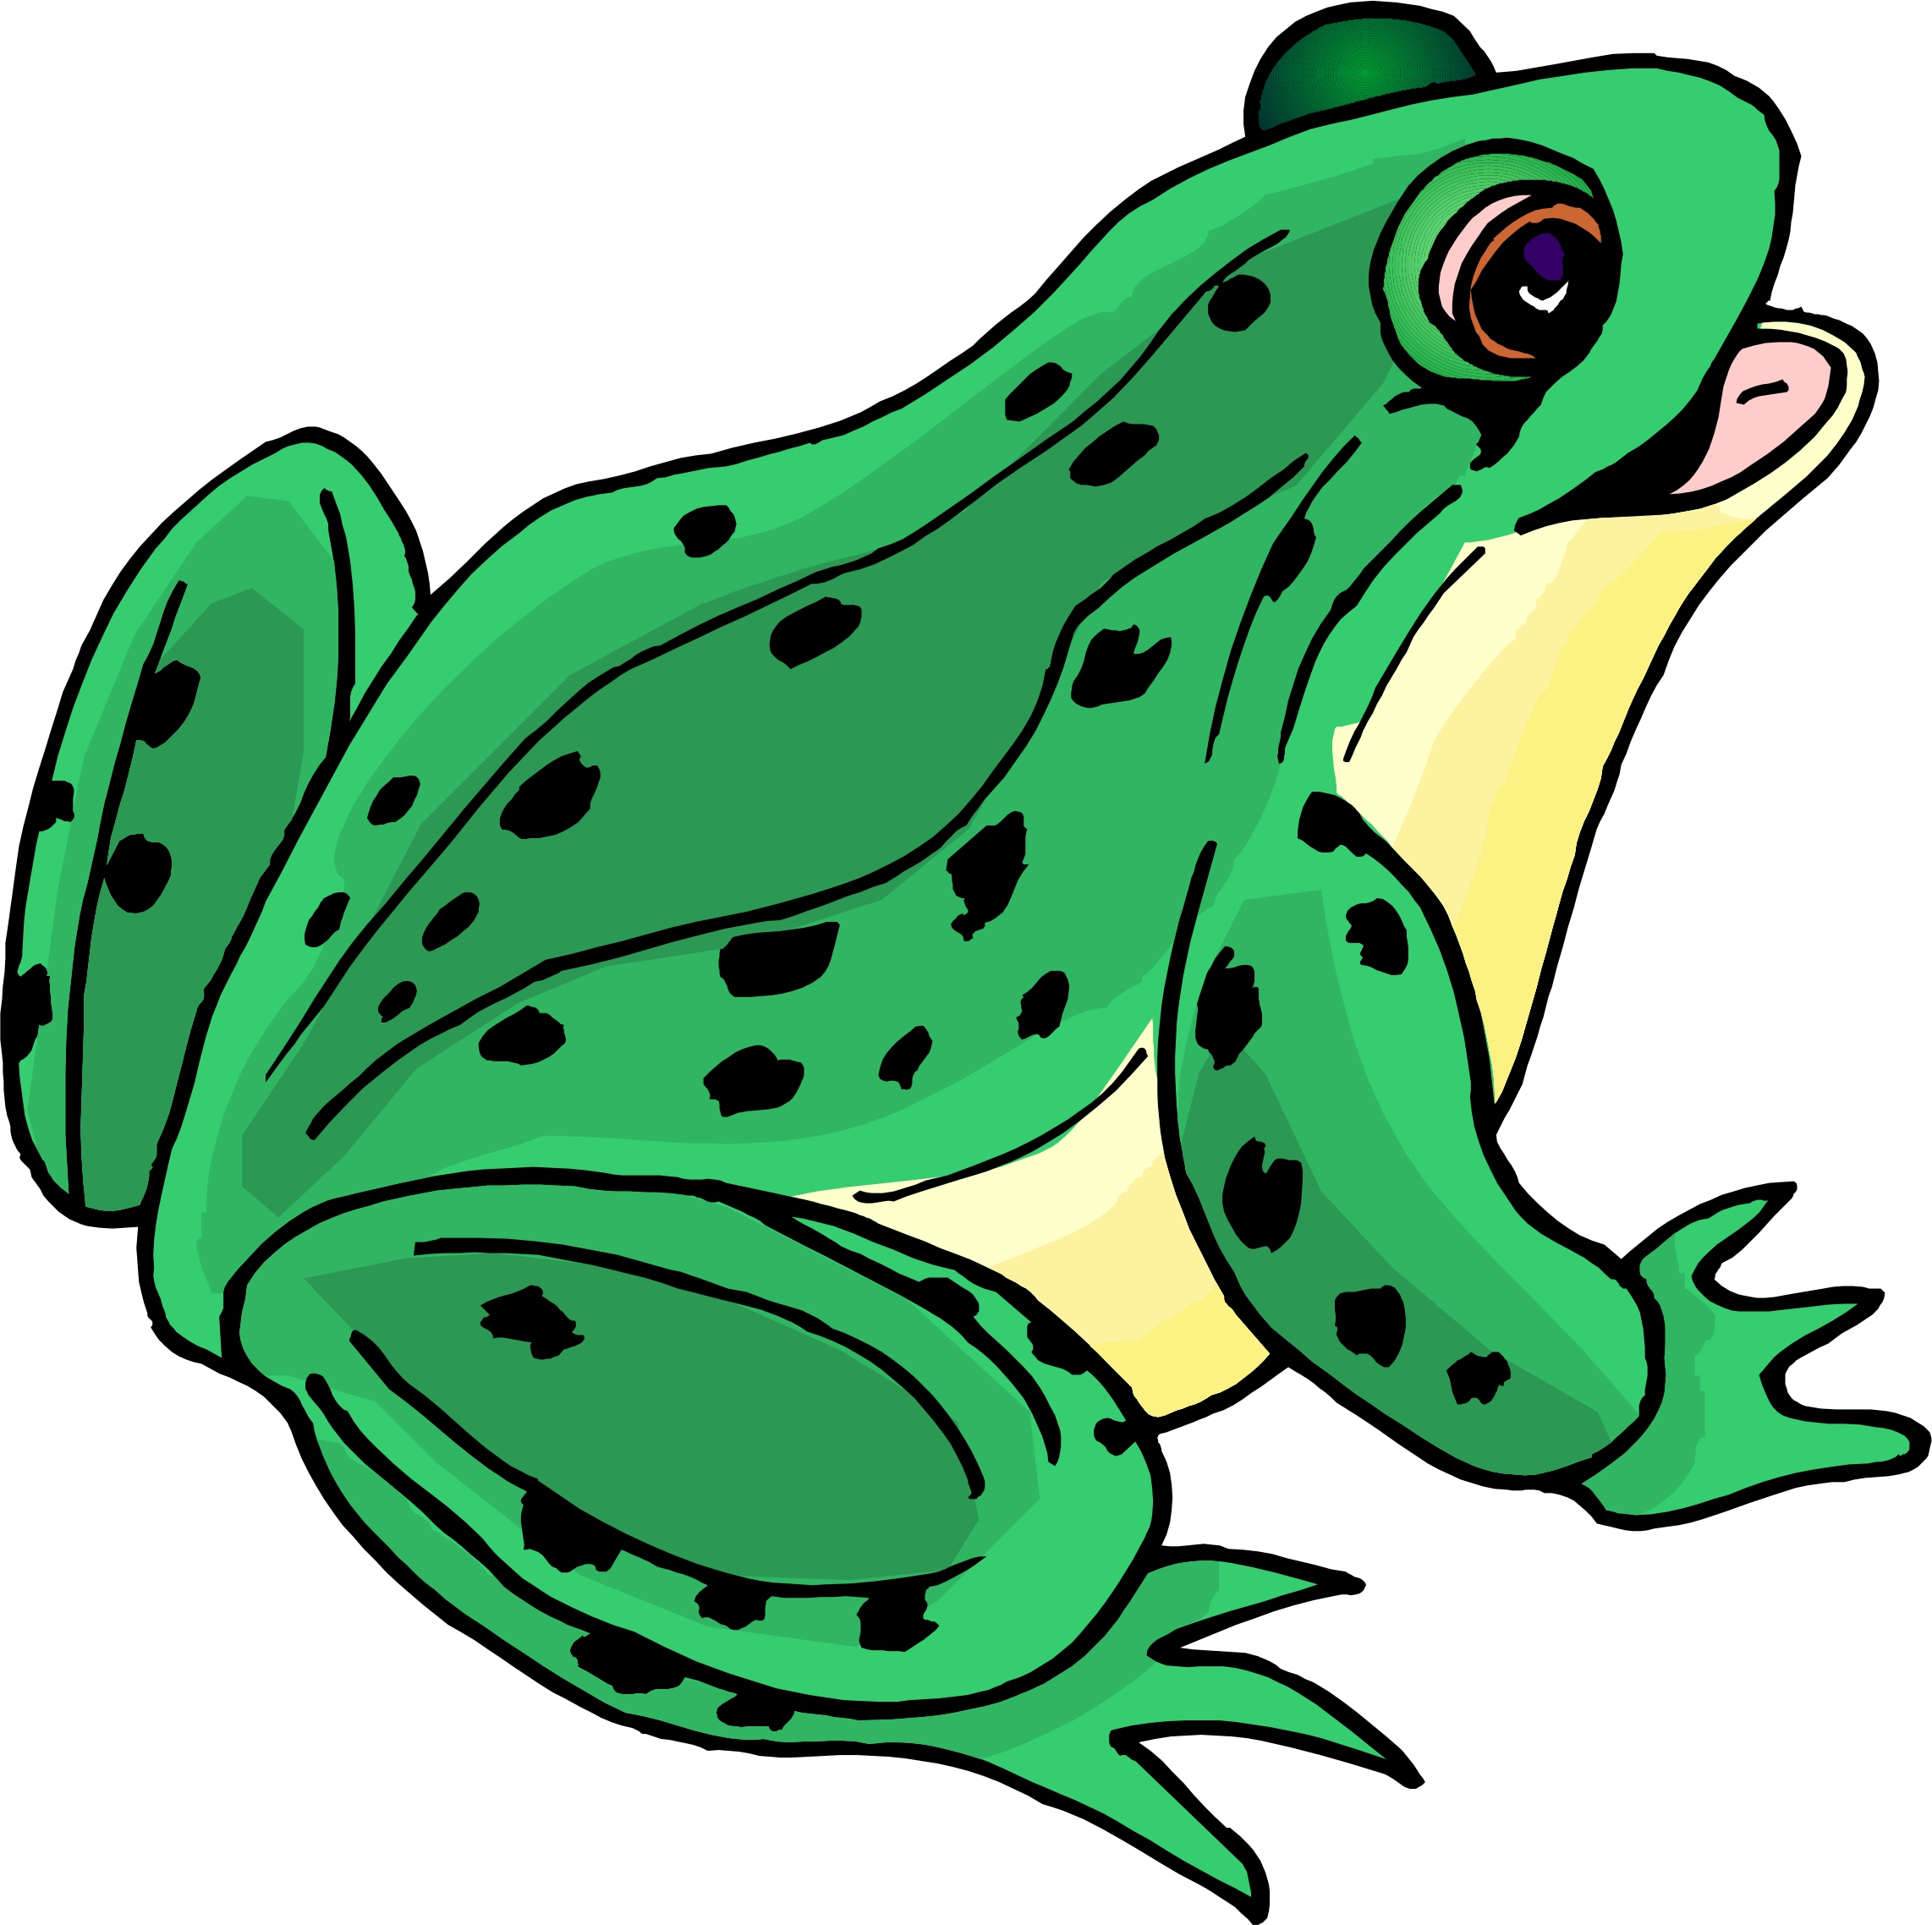 Frogs clipart cartoon Frogs cartoon Transparent FREE for download on WebStockReview 2020